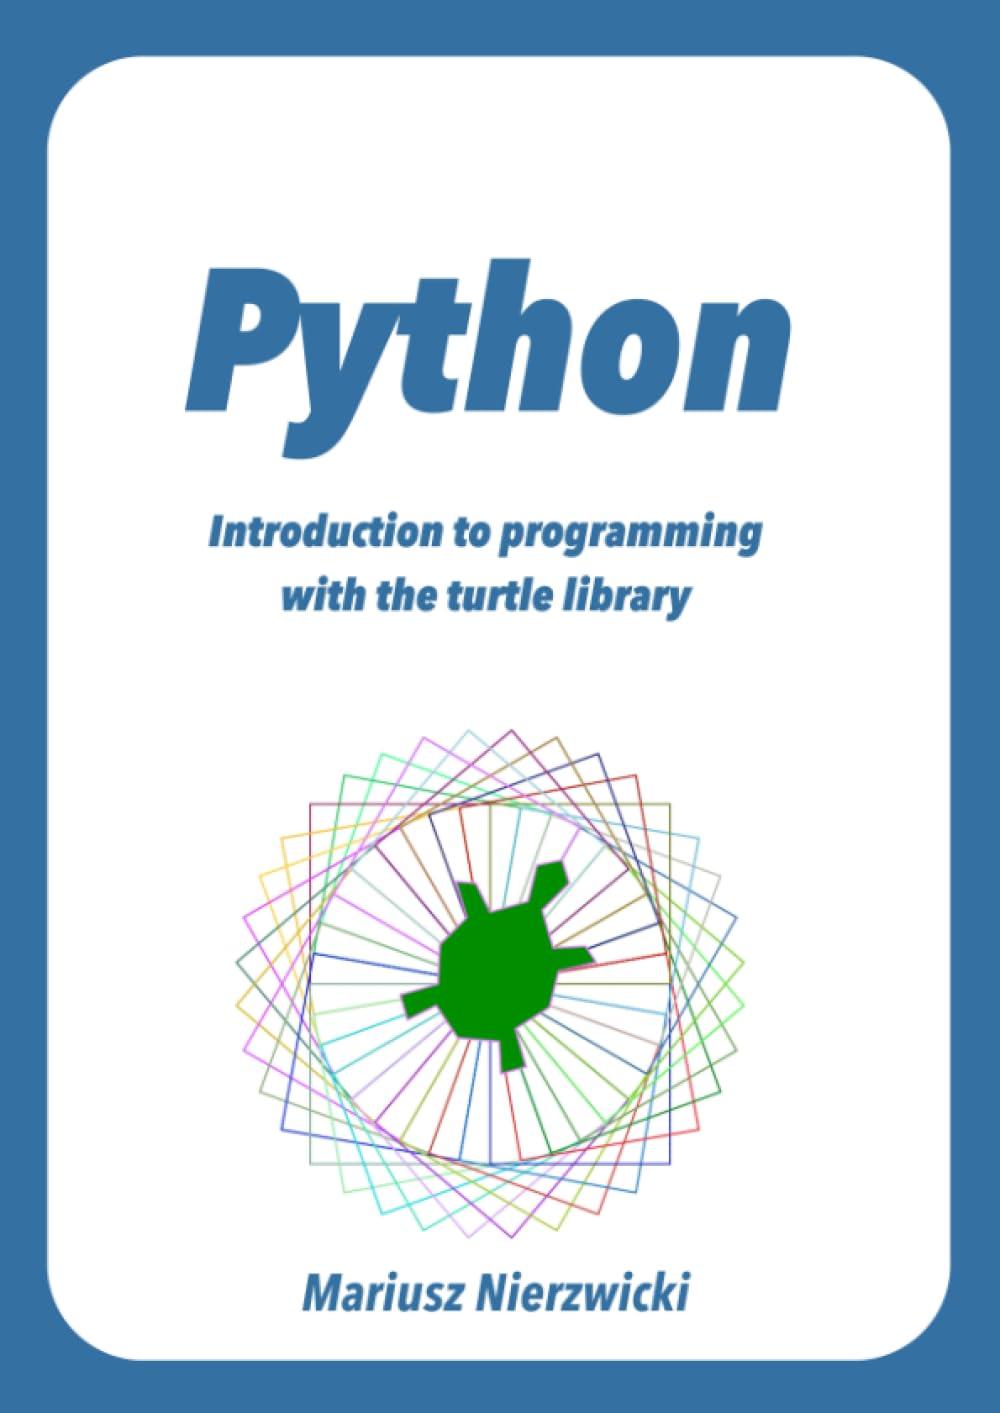 python introduction to programming with the turtle library 1st edition mariusz nierzwicki b0cf4lqclr,